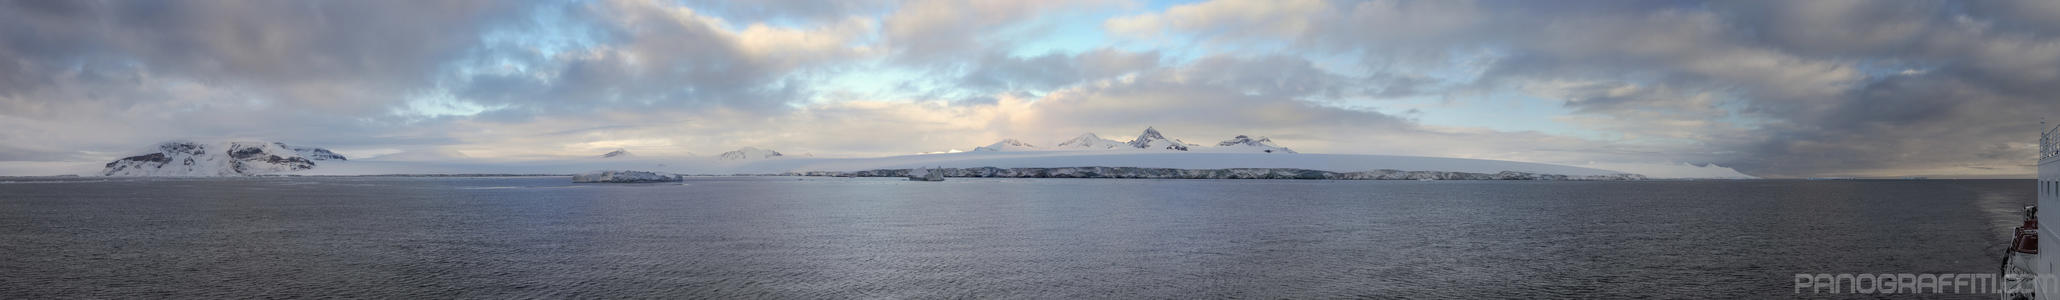 Arriving in the Antarctic Peninsula on the Akademik Loffe - 1,000 km away from South America, the harbors of the Antarctic Peninsula offer the first opportunity for calm waters after crossing the Drake.